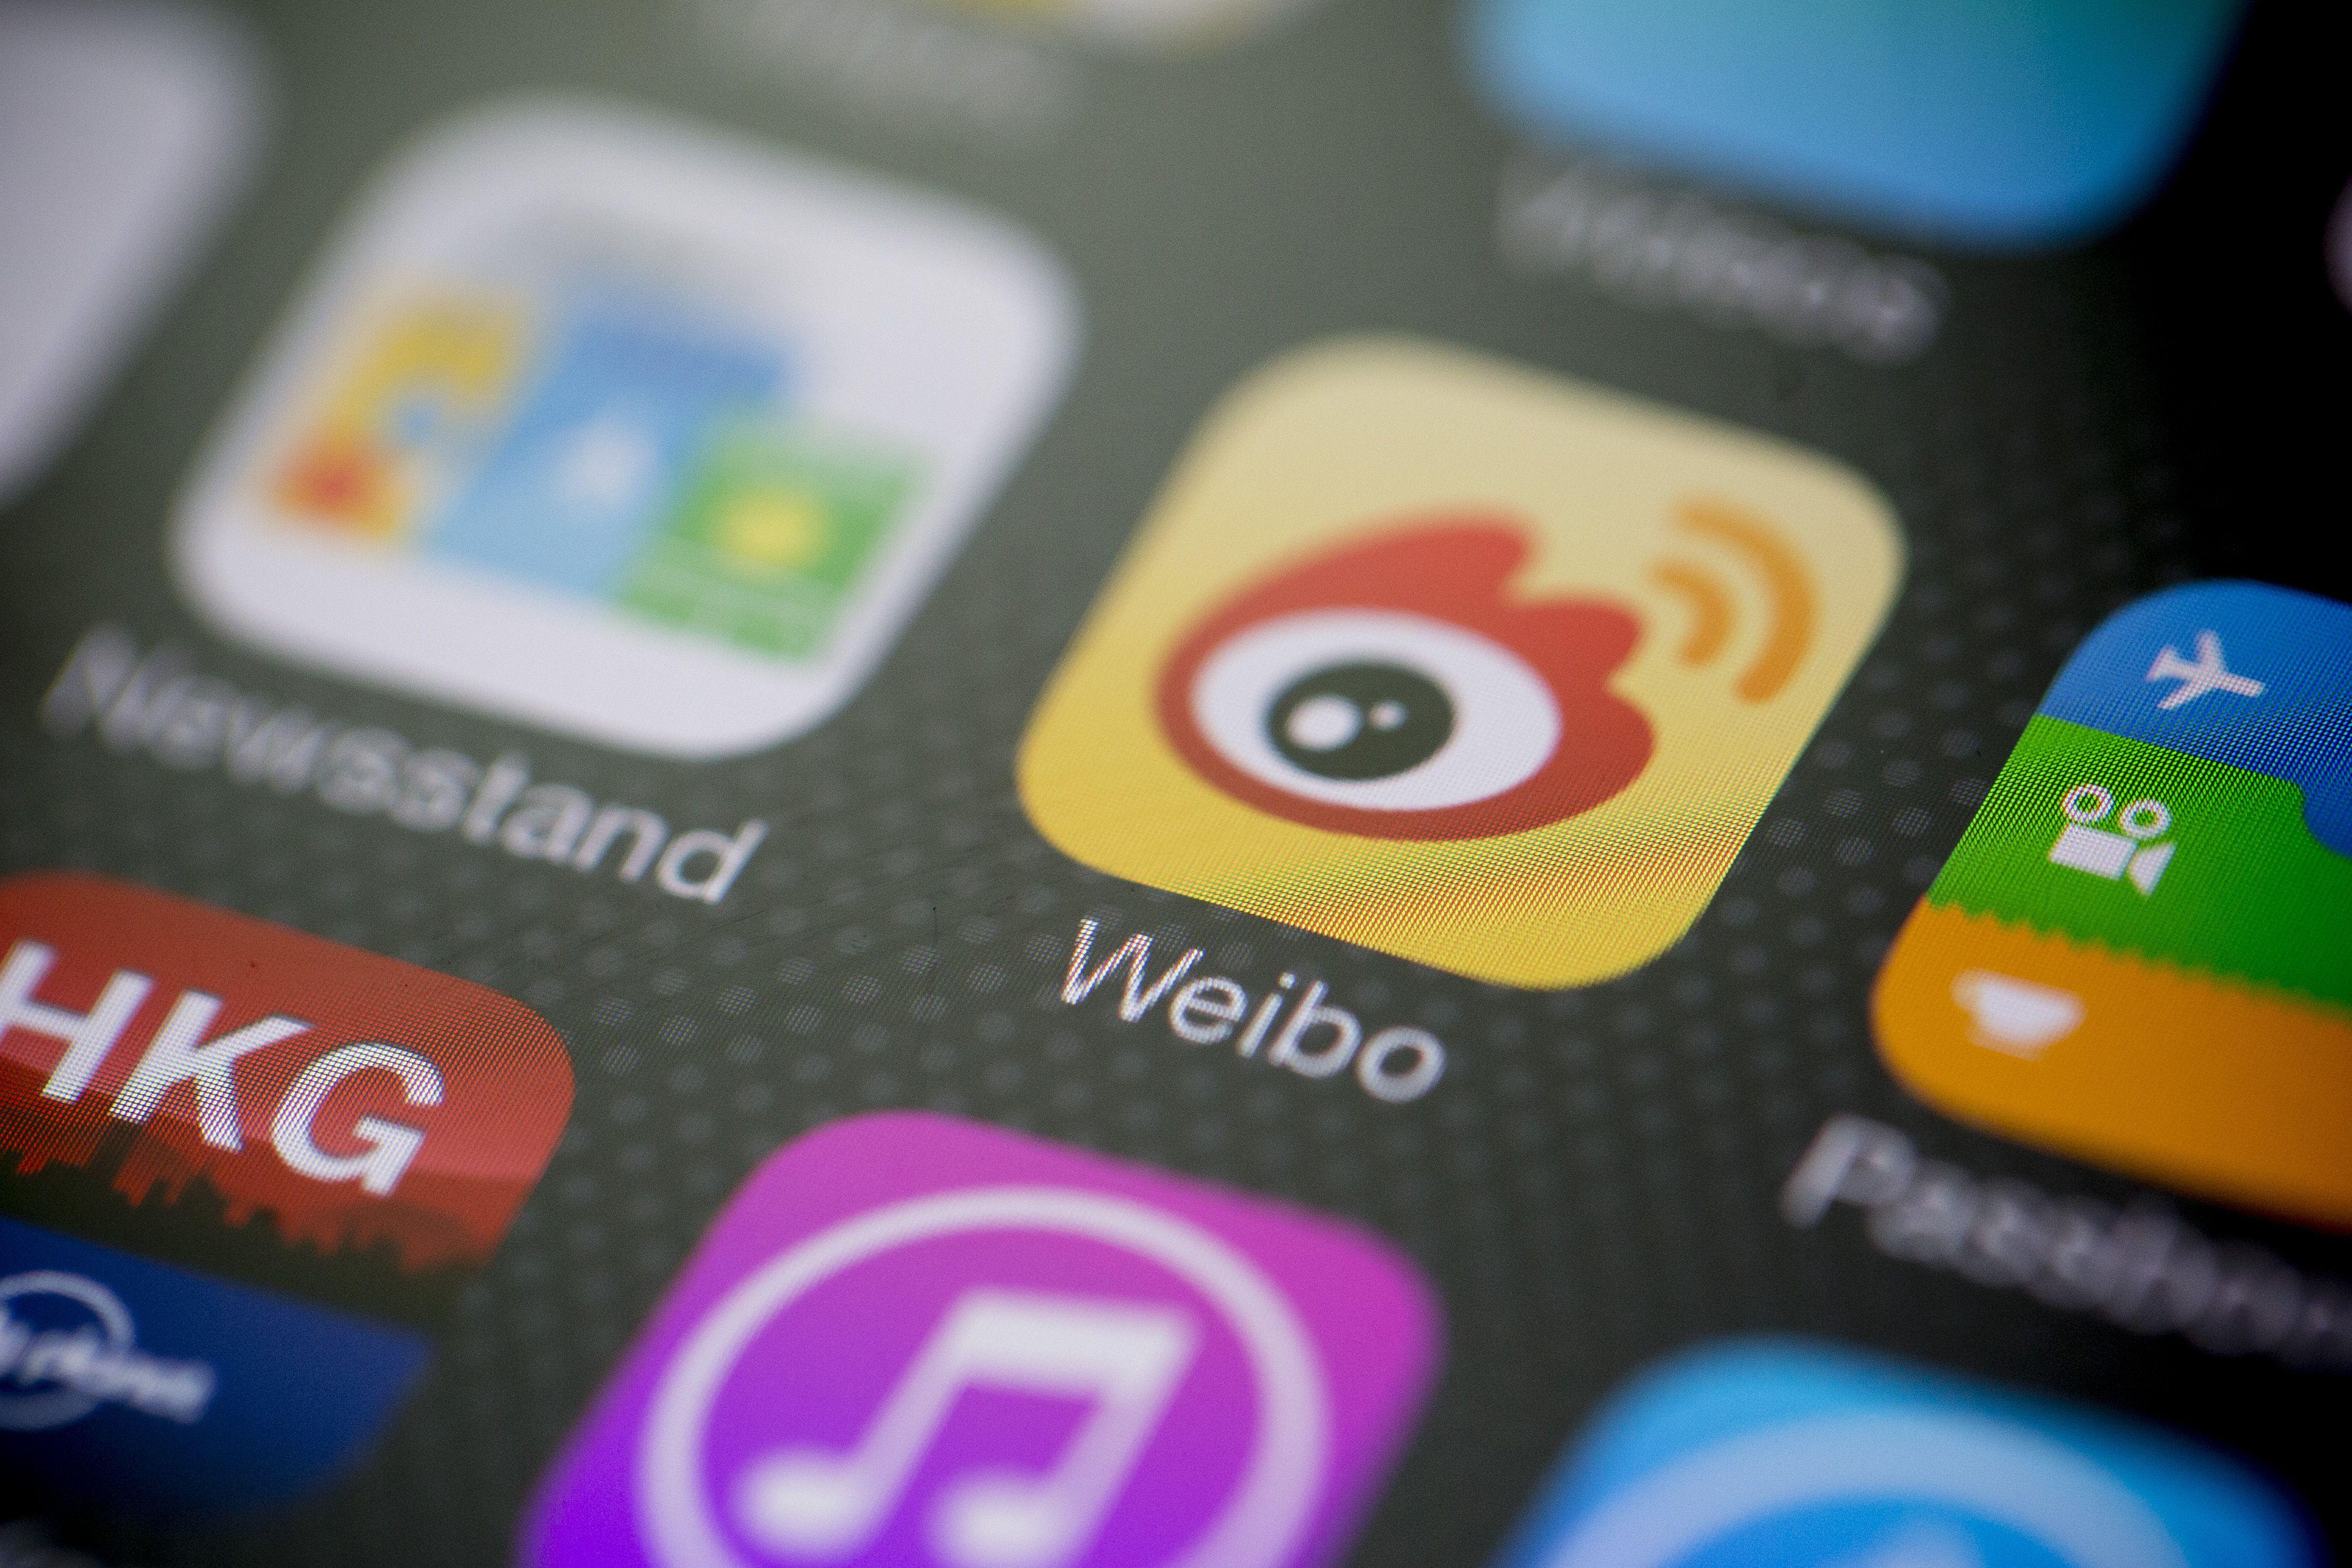 Weibo App Logo - China: Weibo Vows to Crack Down on Unapproved Video Content | Fortune